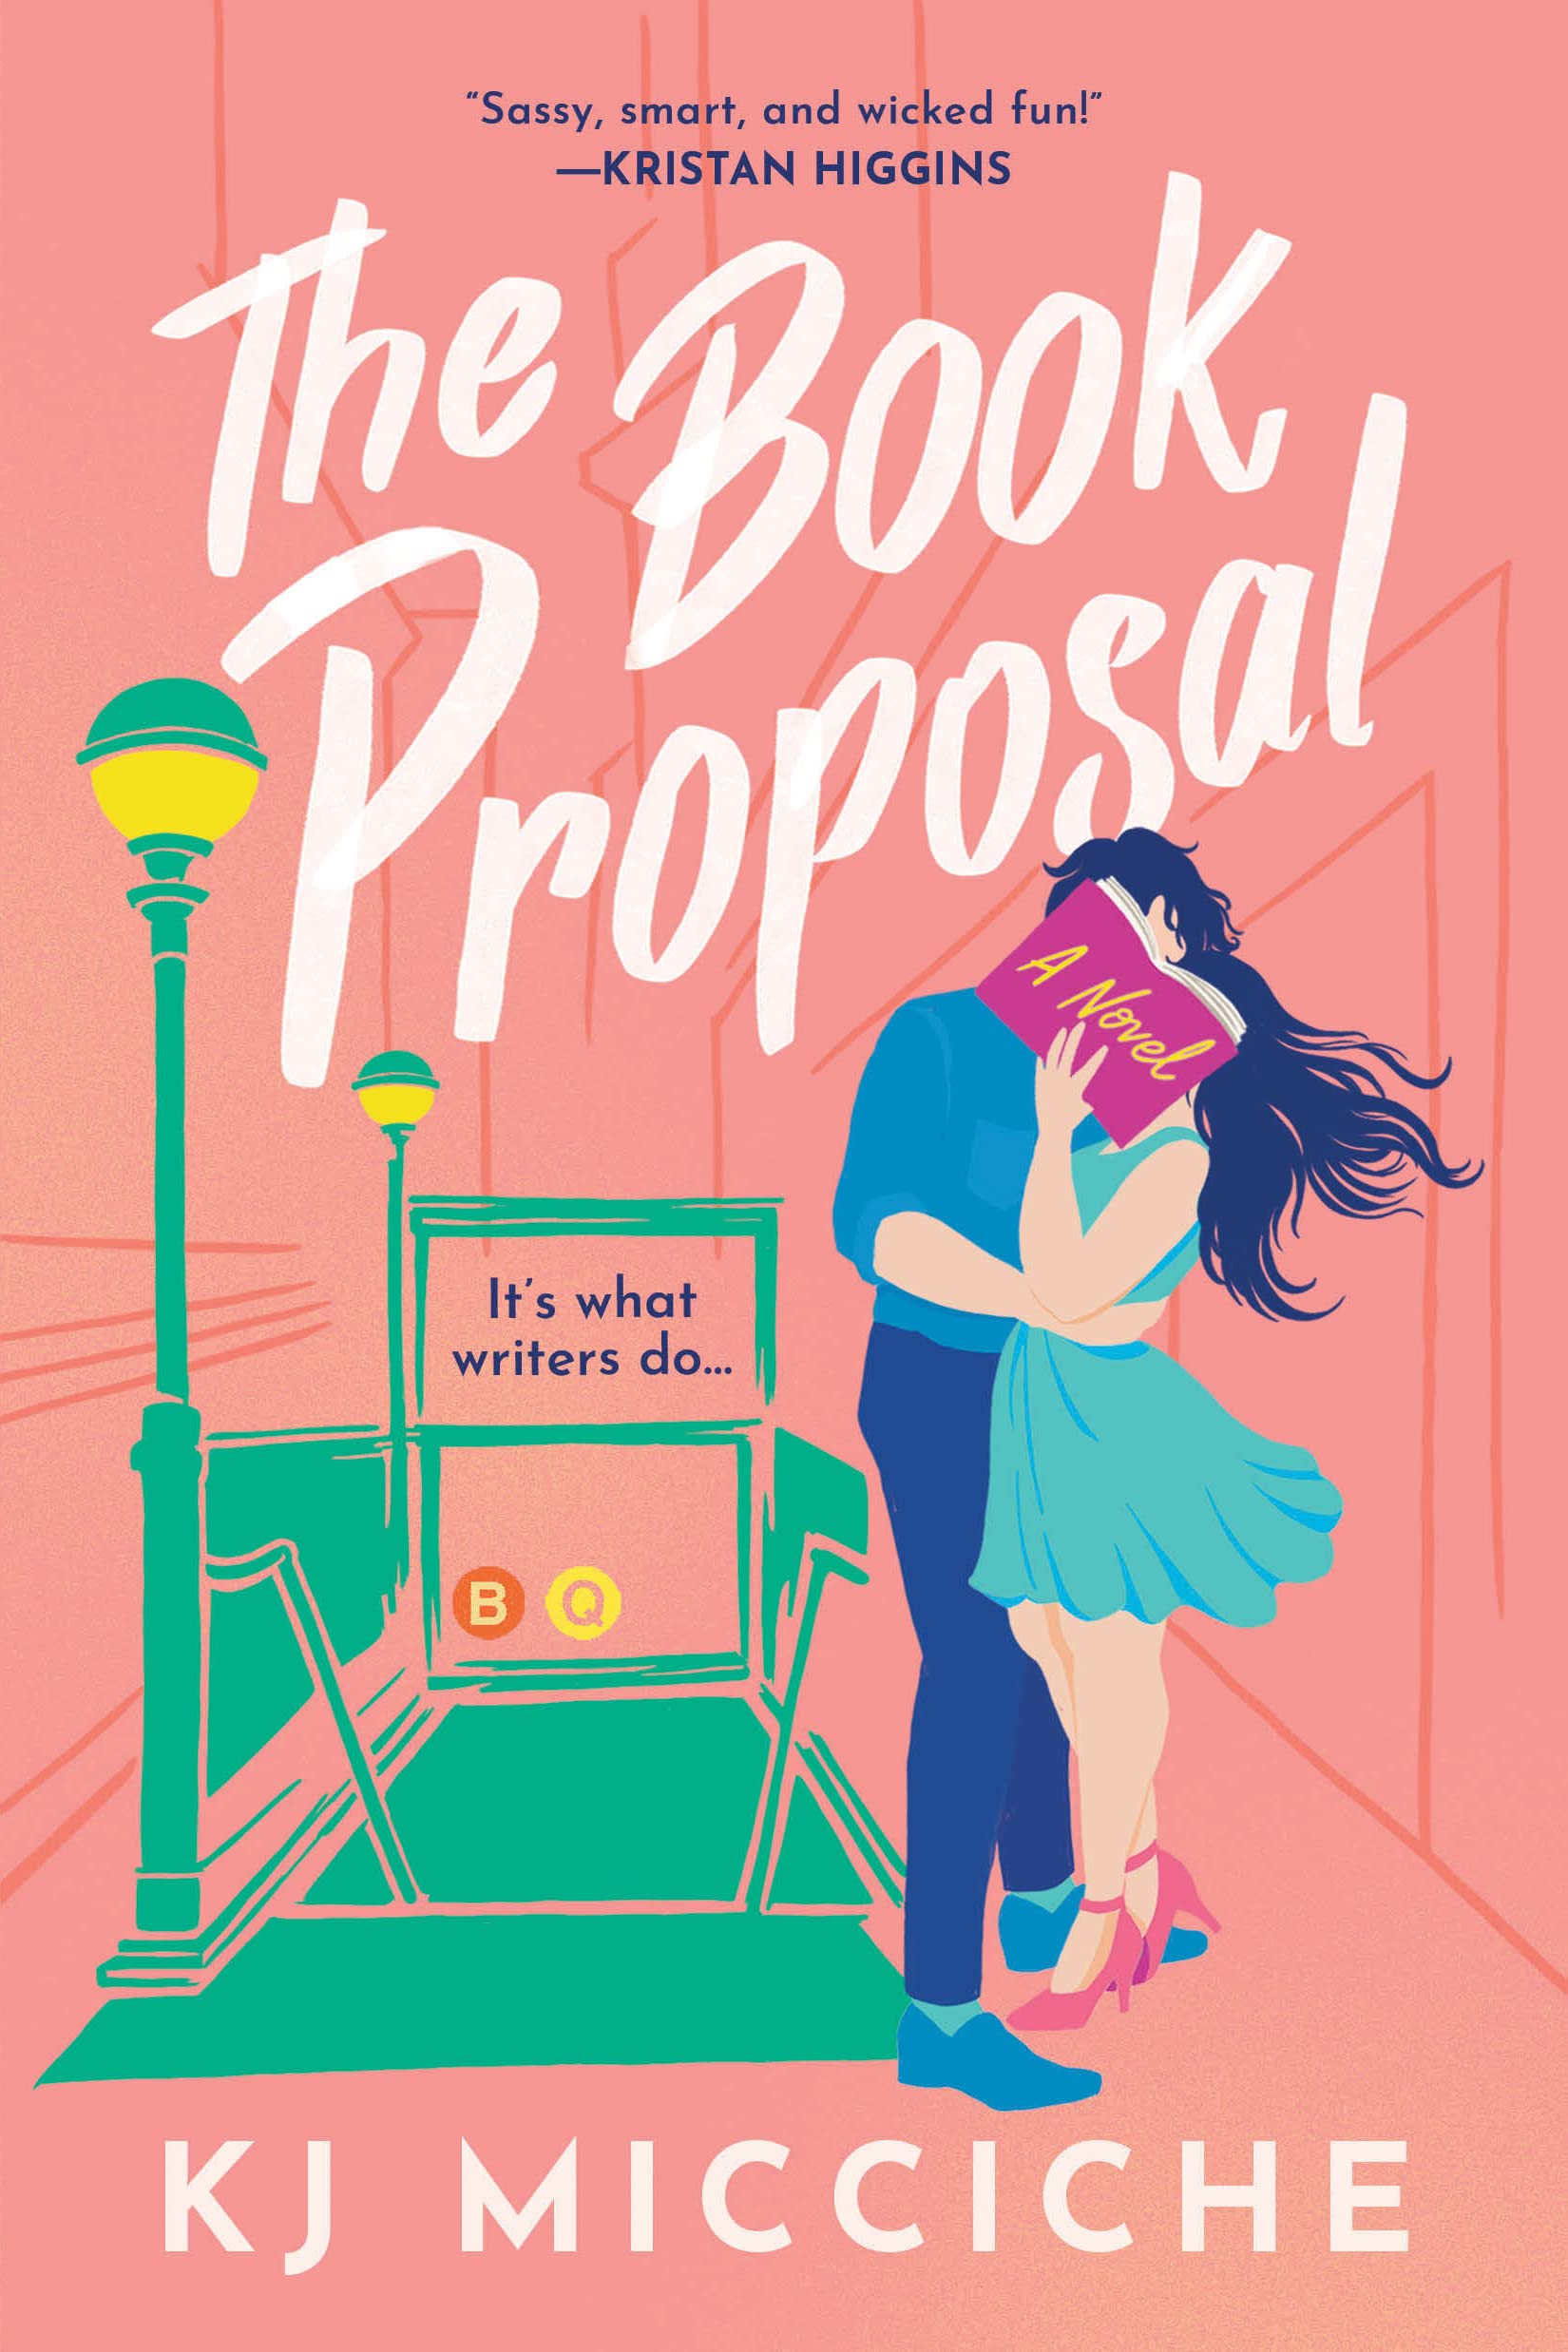 Image for "The Book Proposal"